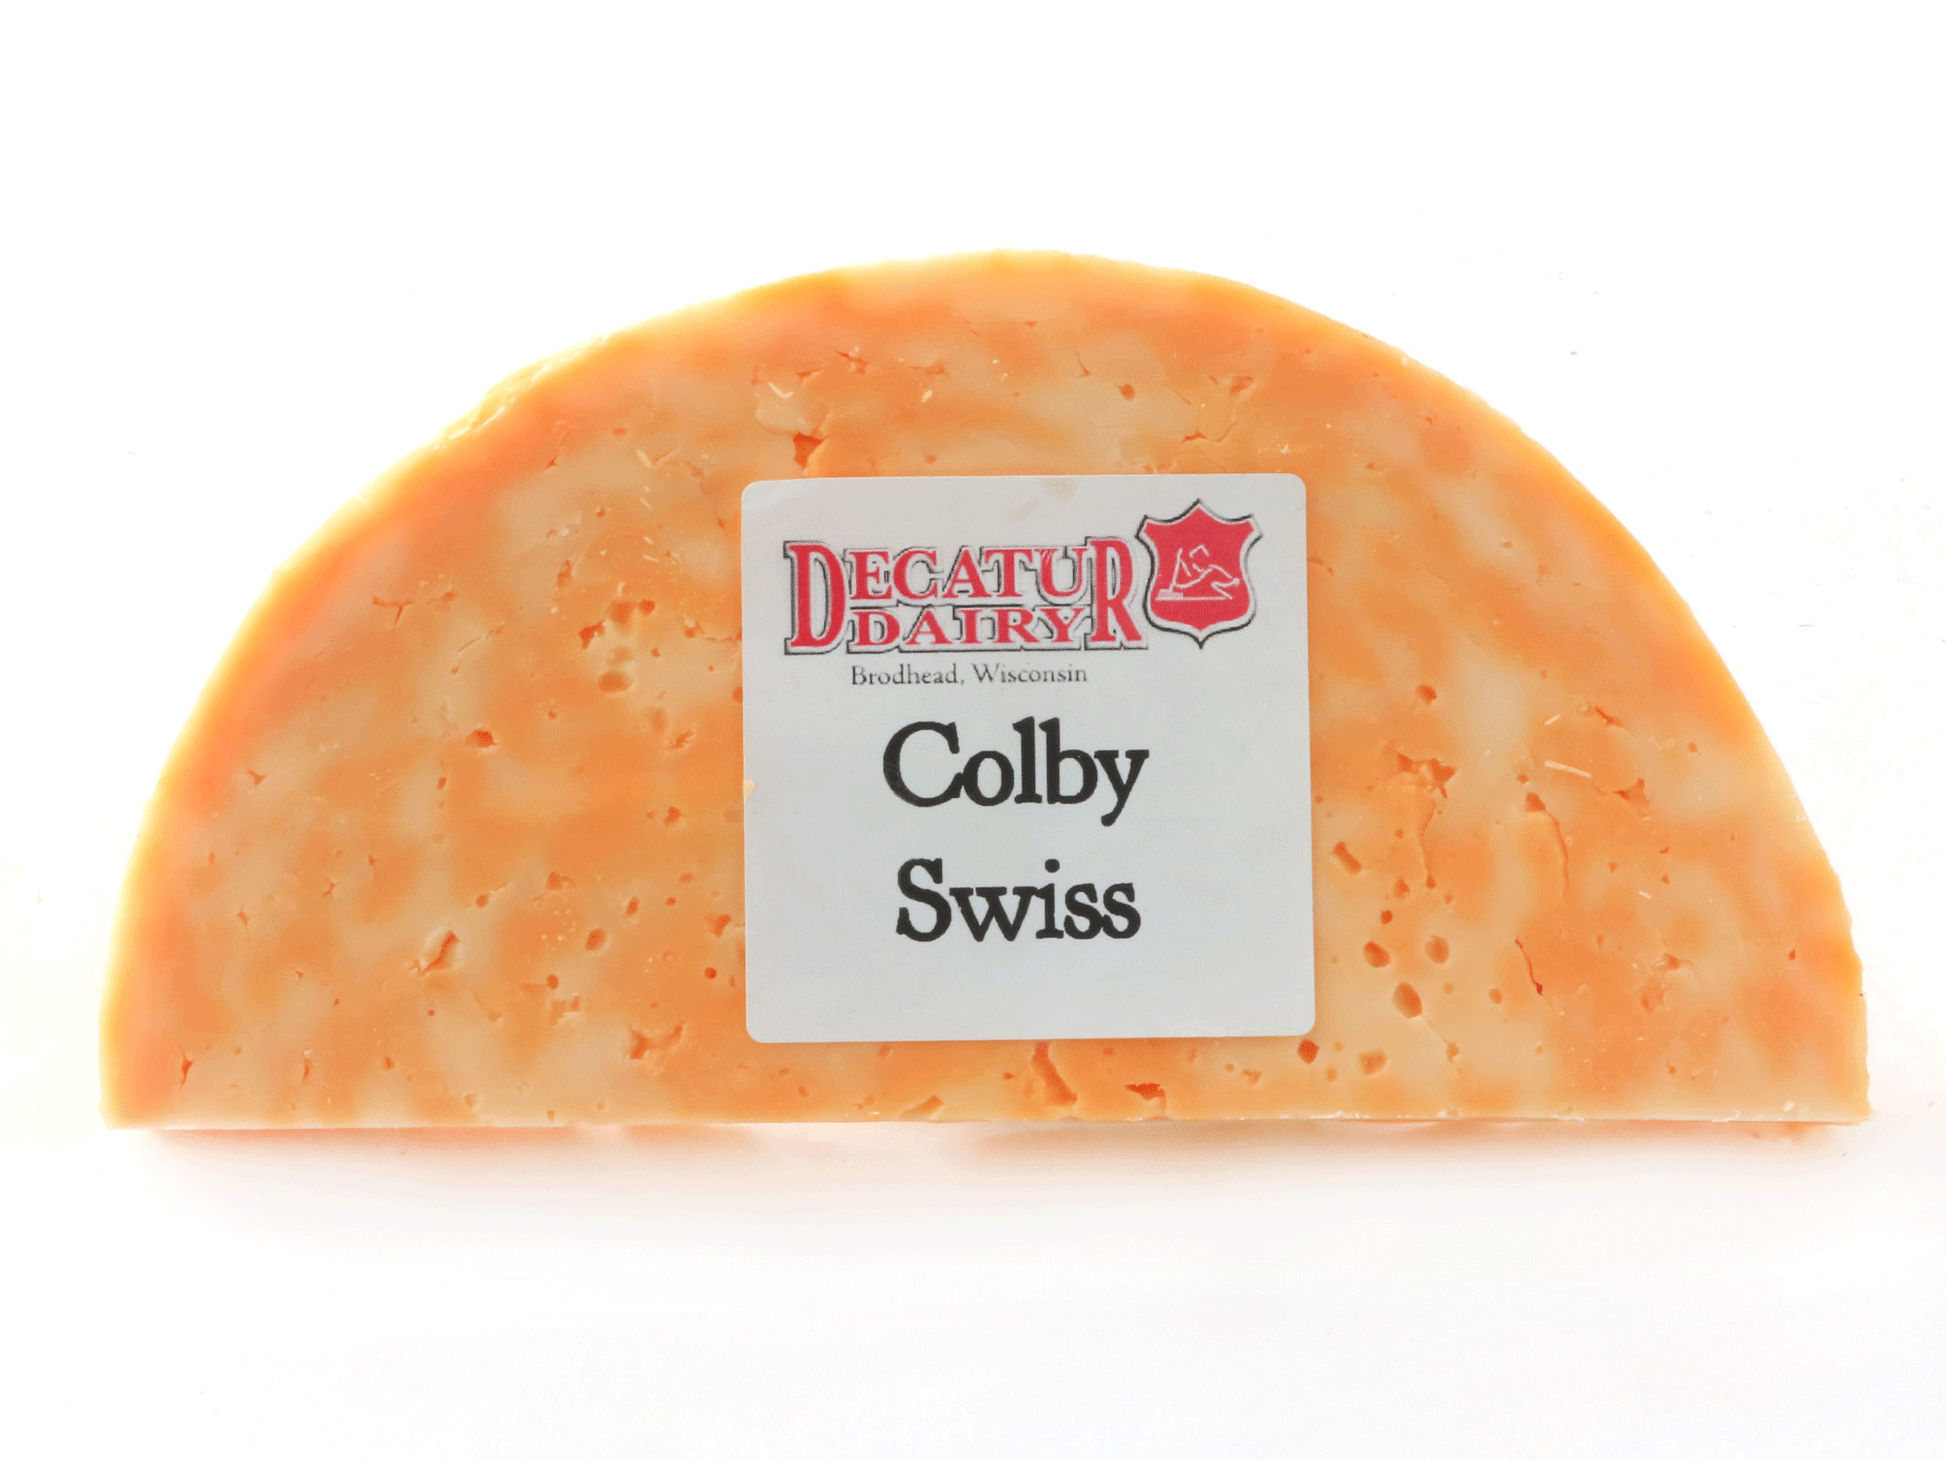 8 ounce piece of colby swiss cheese